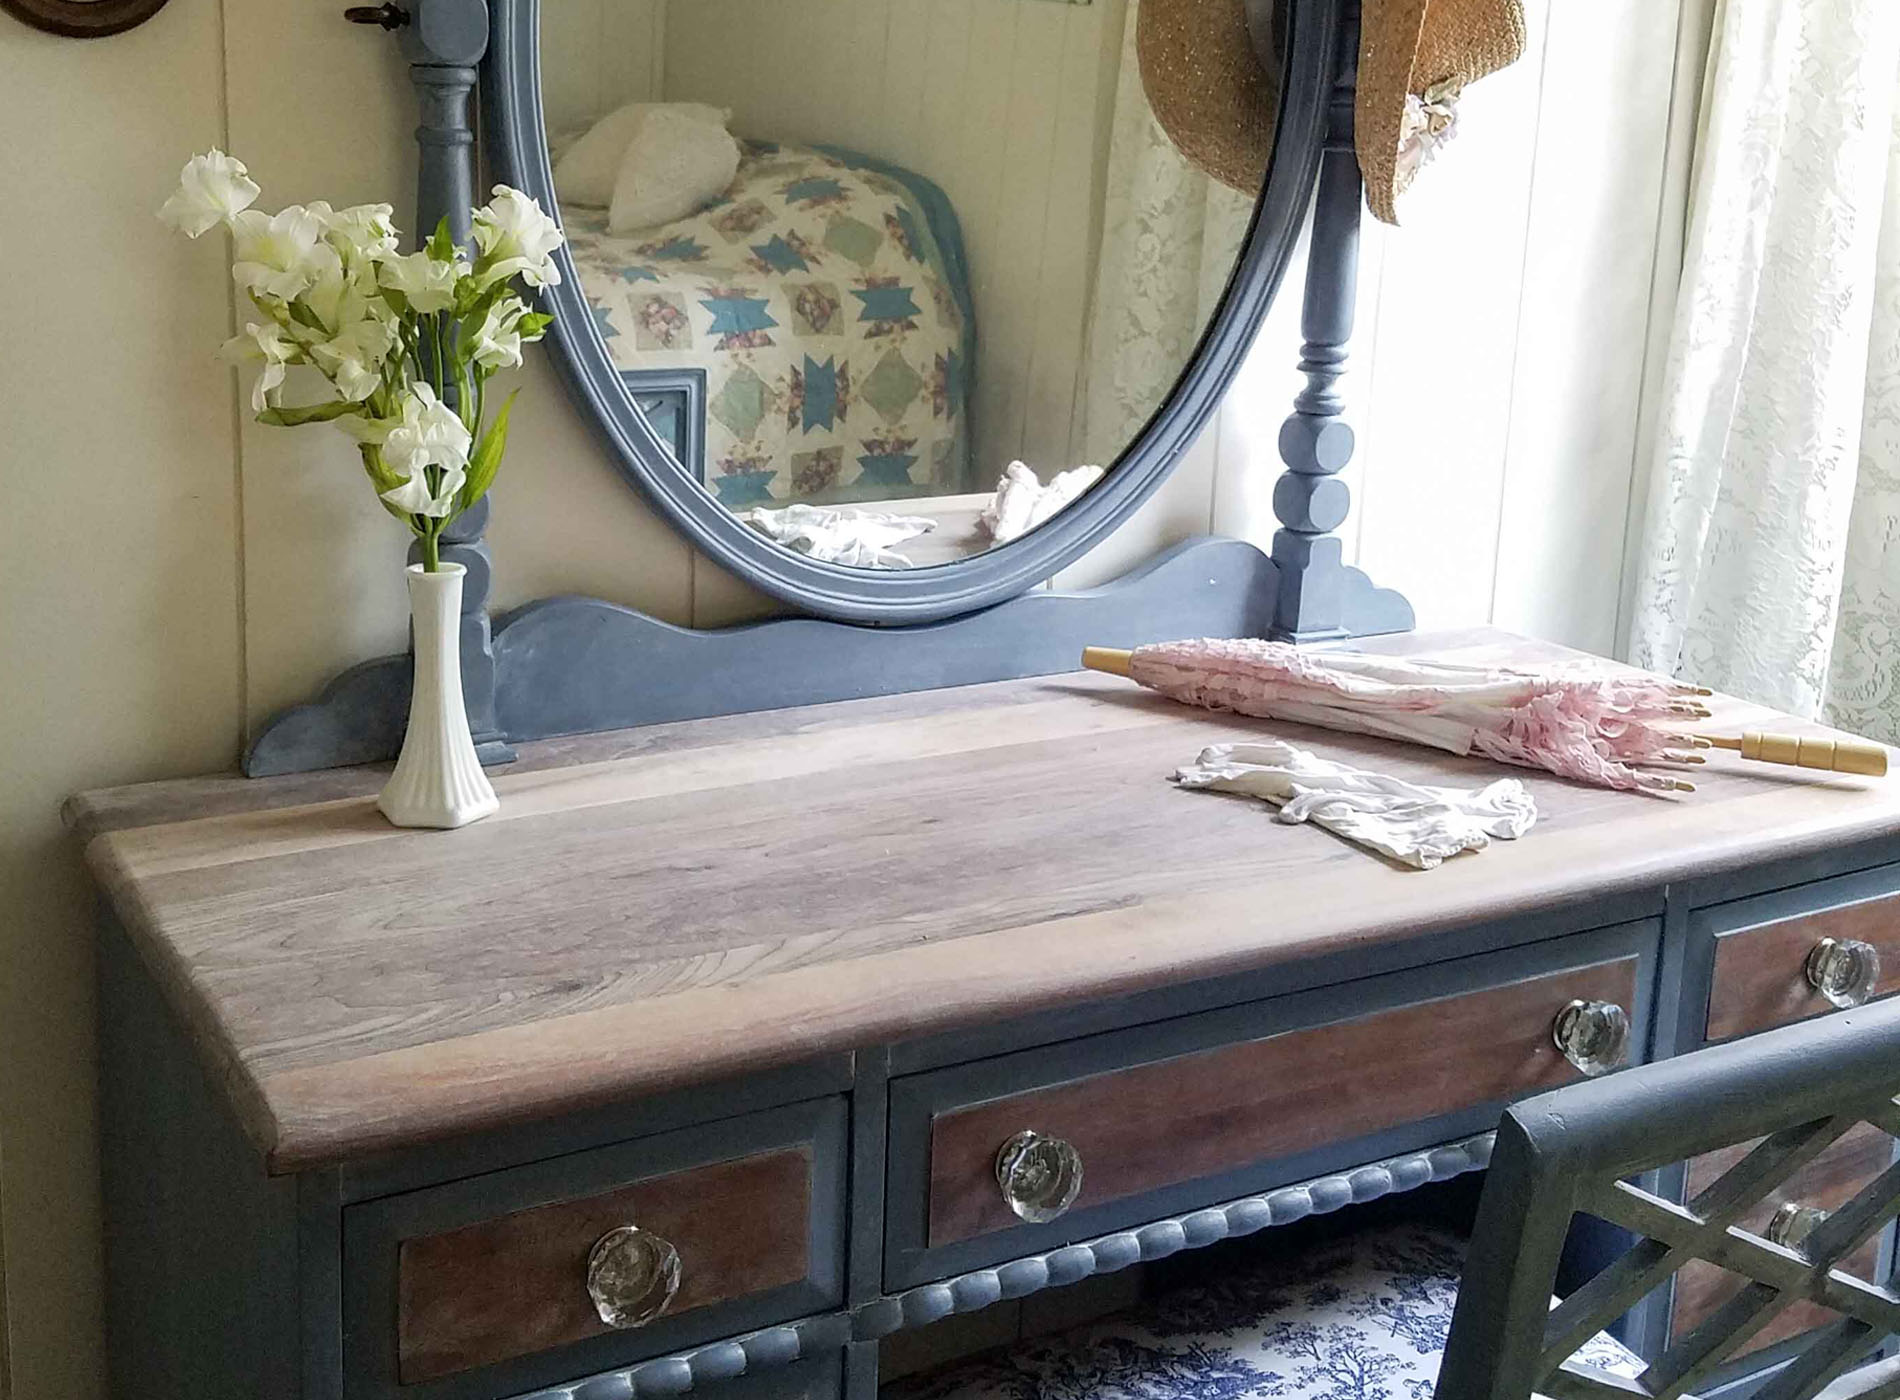 Featured Kroehler Vintage Vanity by Prodigal Pieces | www.prodigalpieces.com